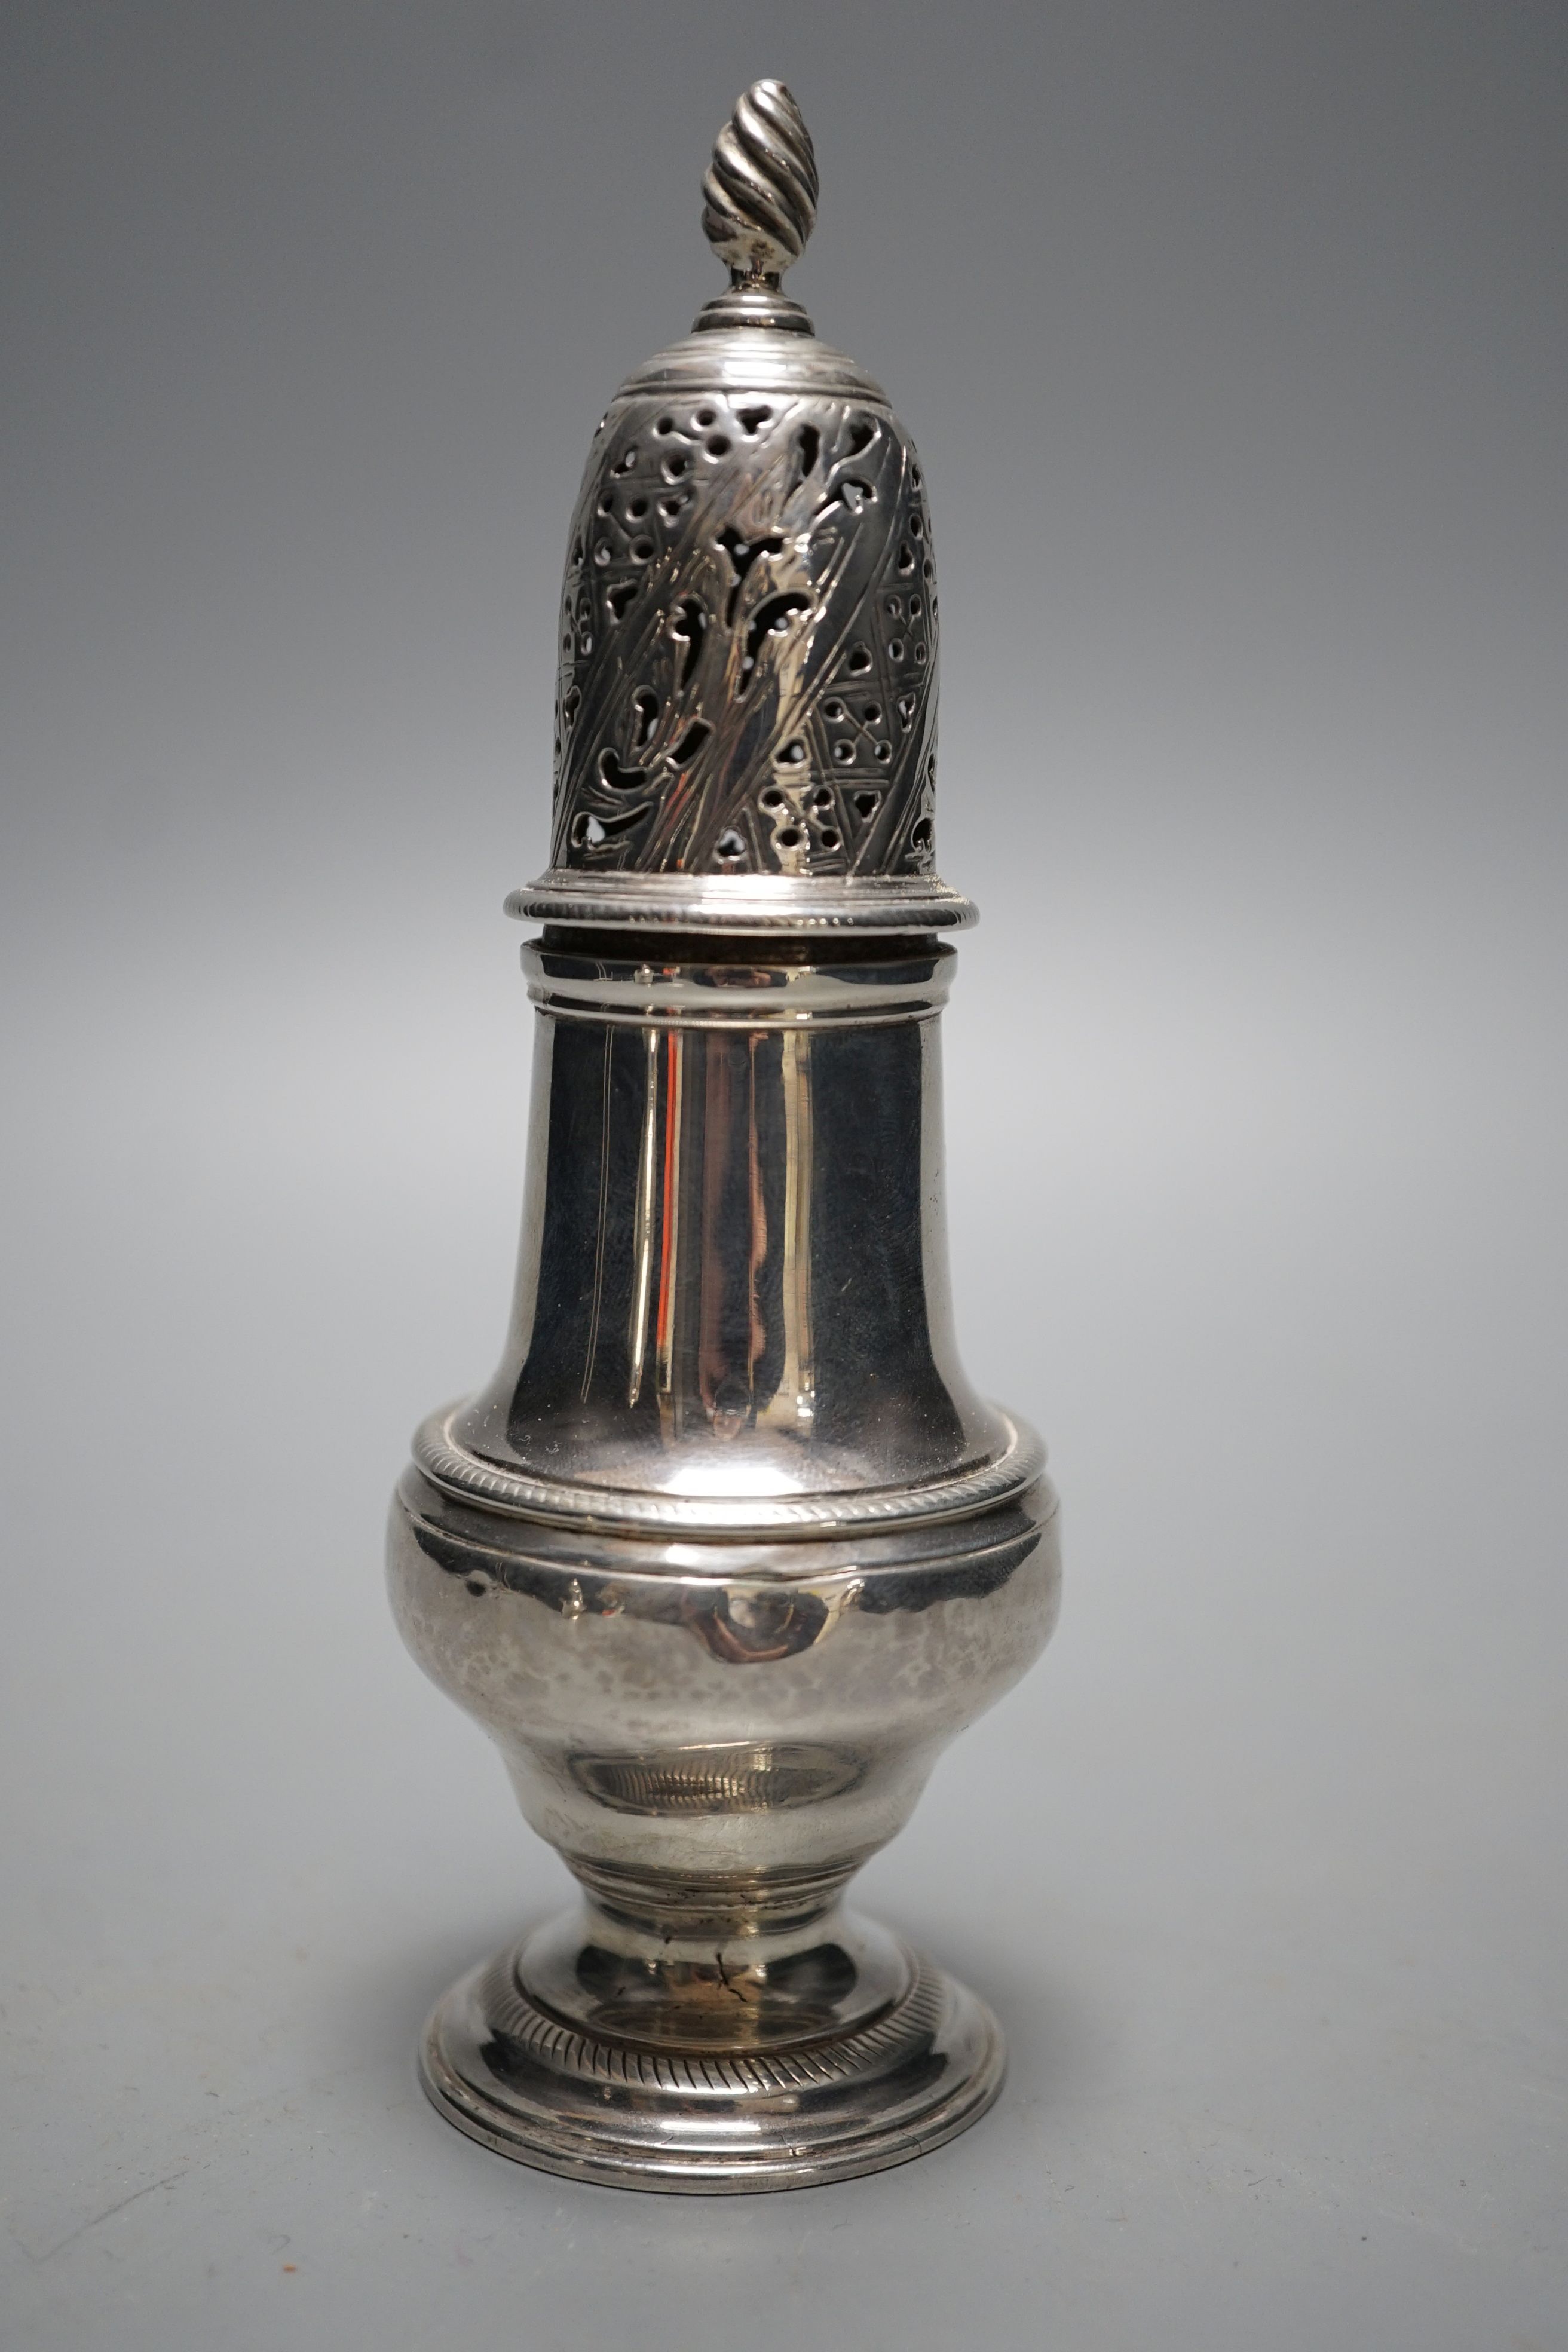 An early George III silver pepper, with interior cap with finial?, John Delmester, London, 1760, 15.2cm, 4.5oz.